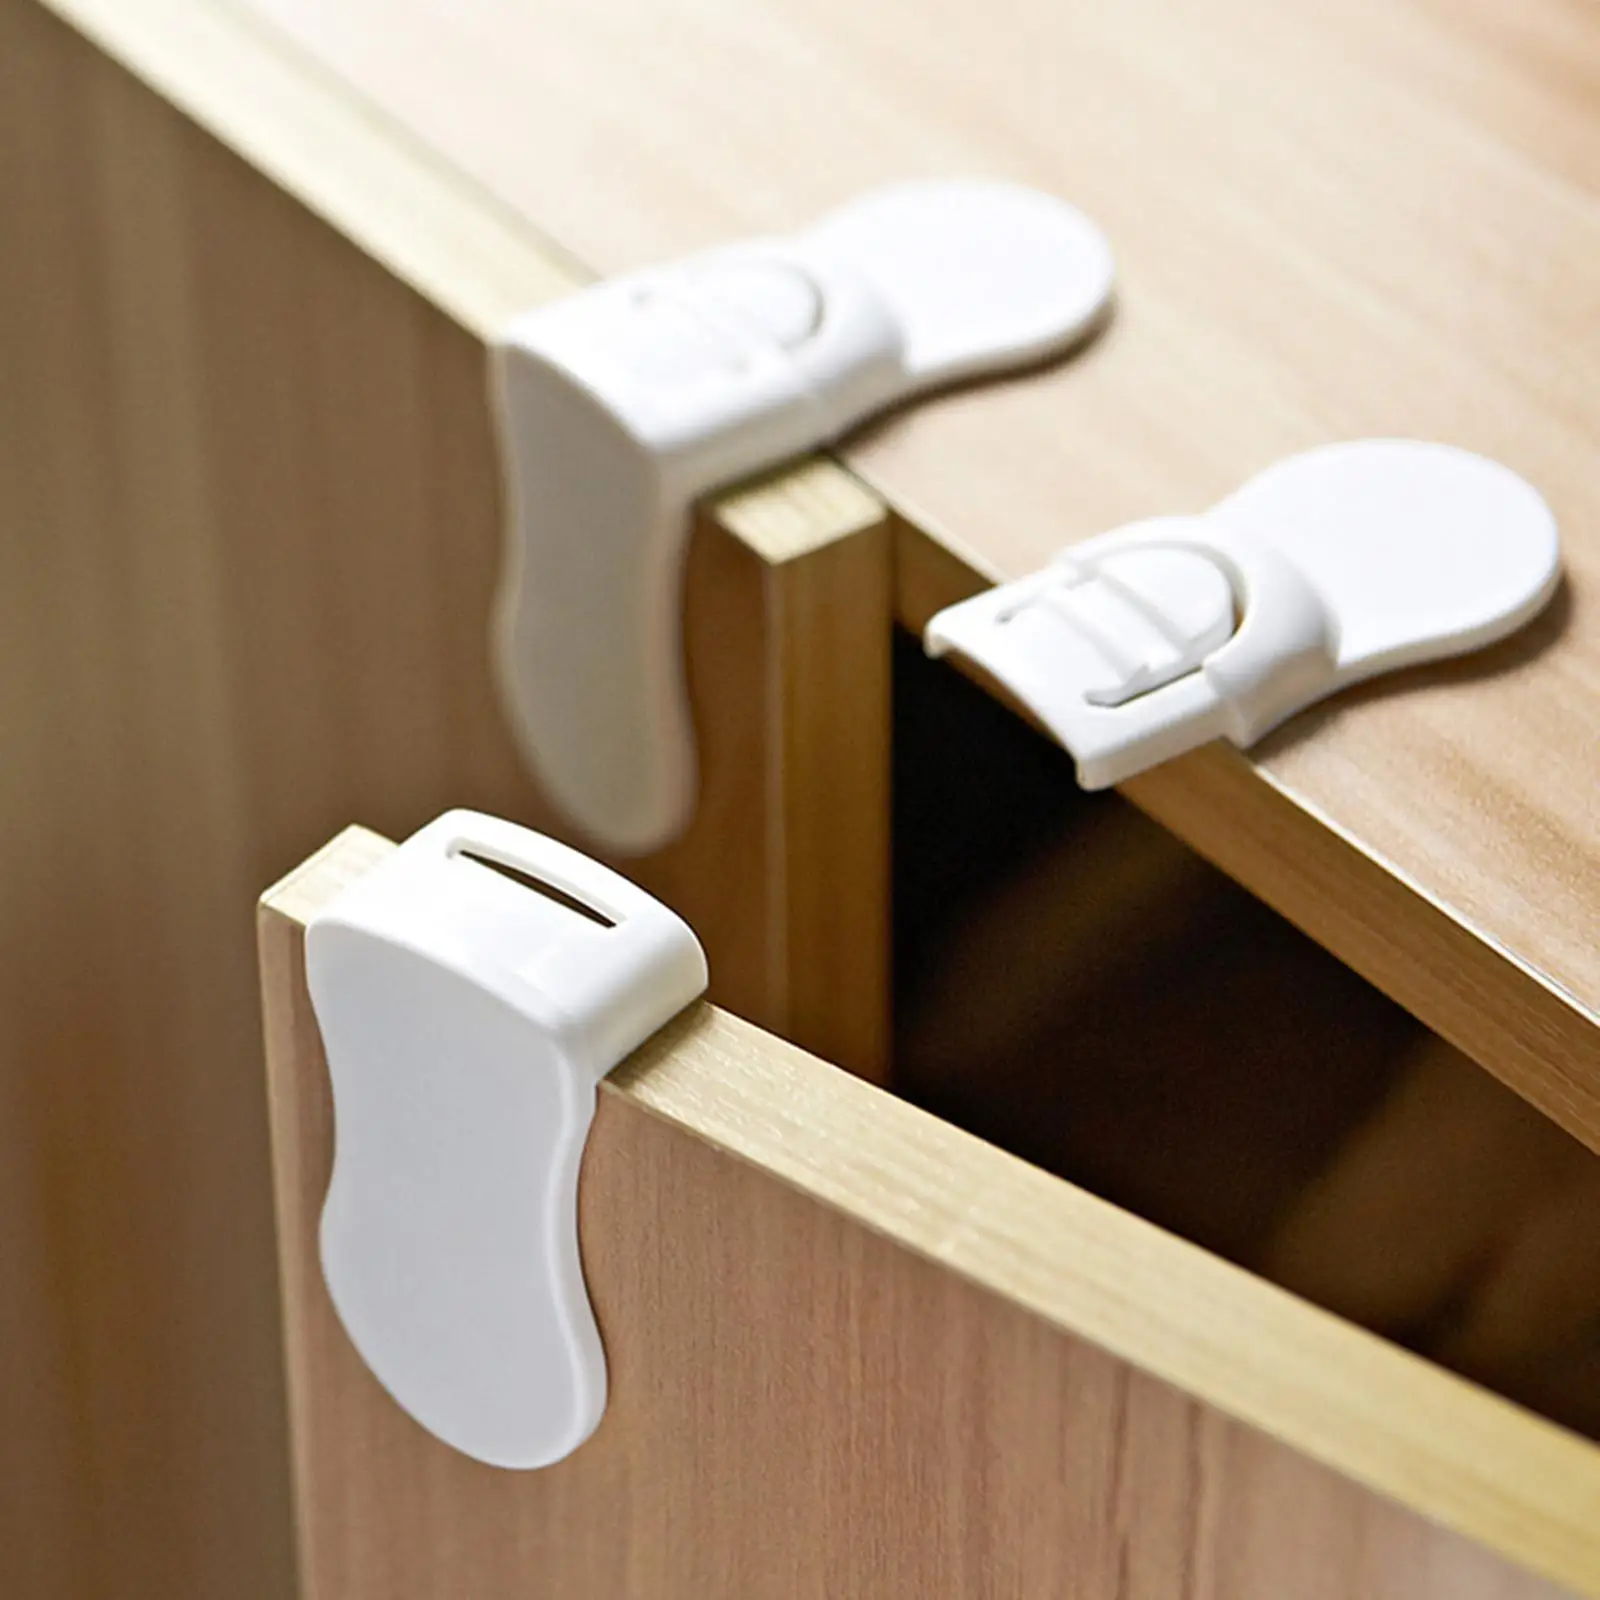 2Pcs Baby Proofing Cabinet Locks, Lock System Cabinet Locks for Drawers Cabinets